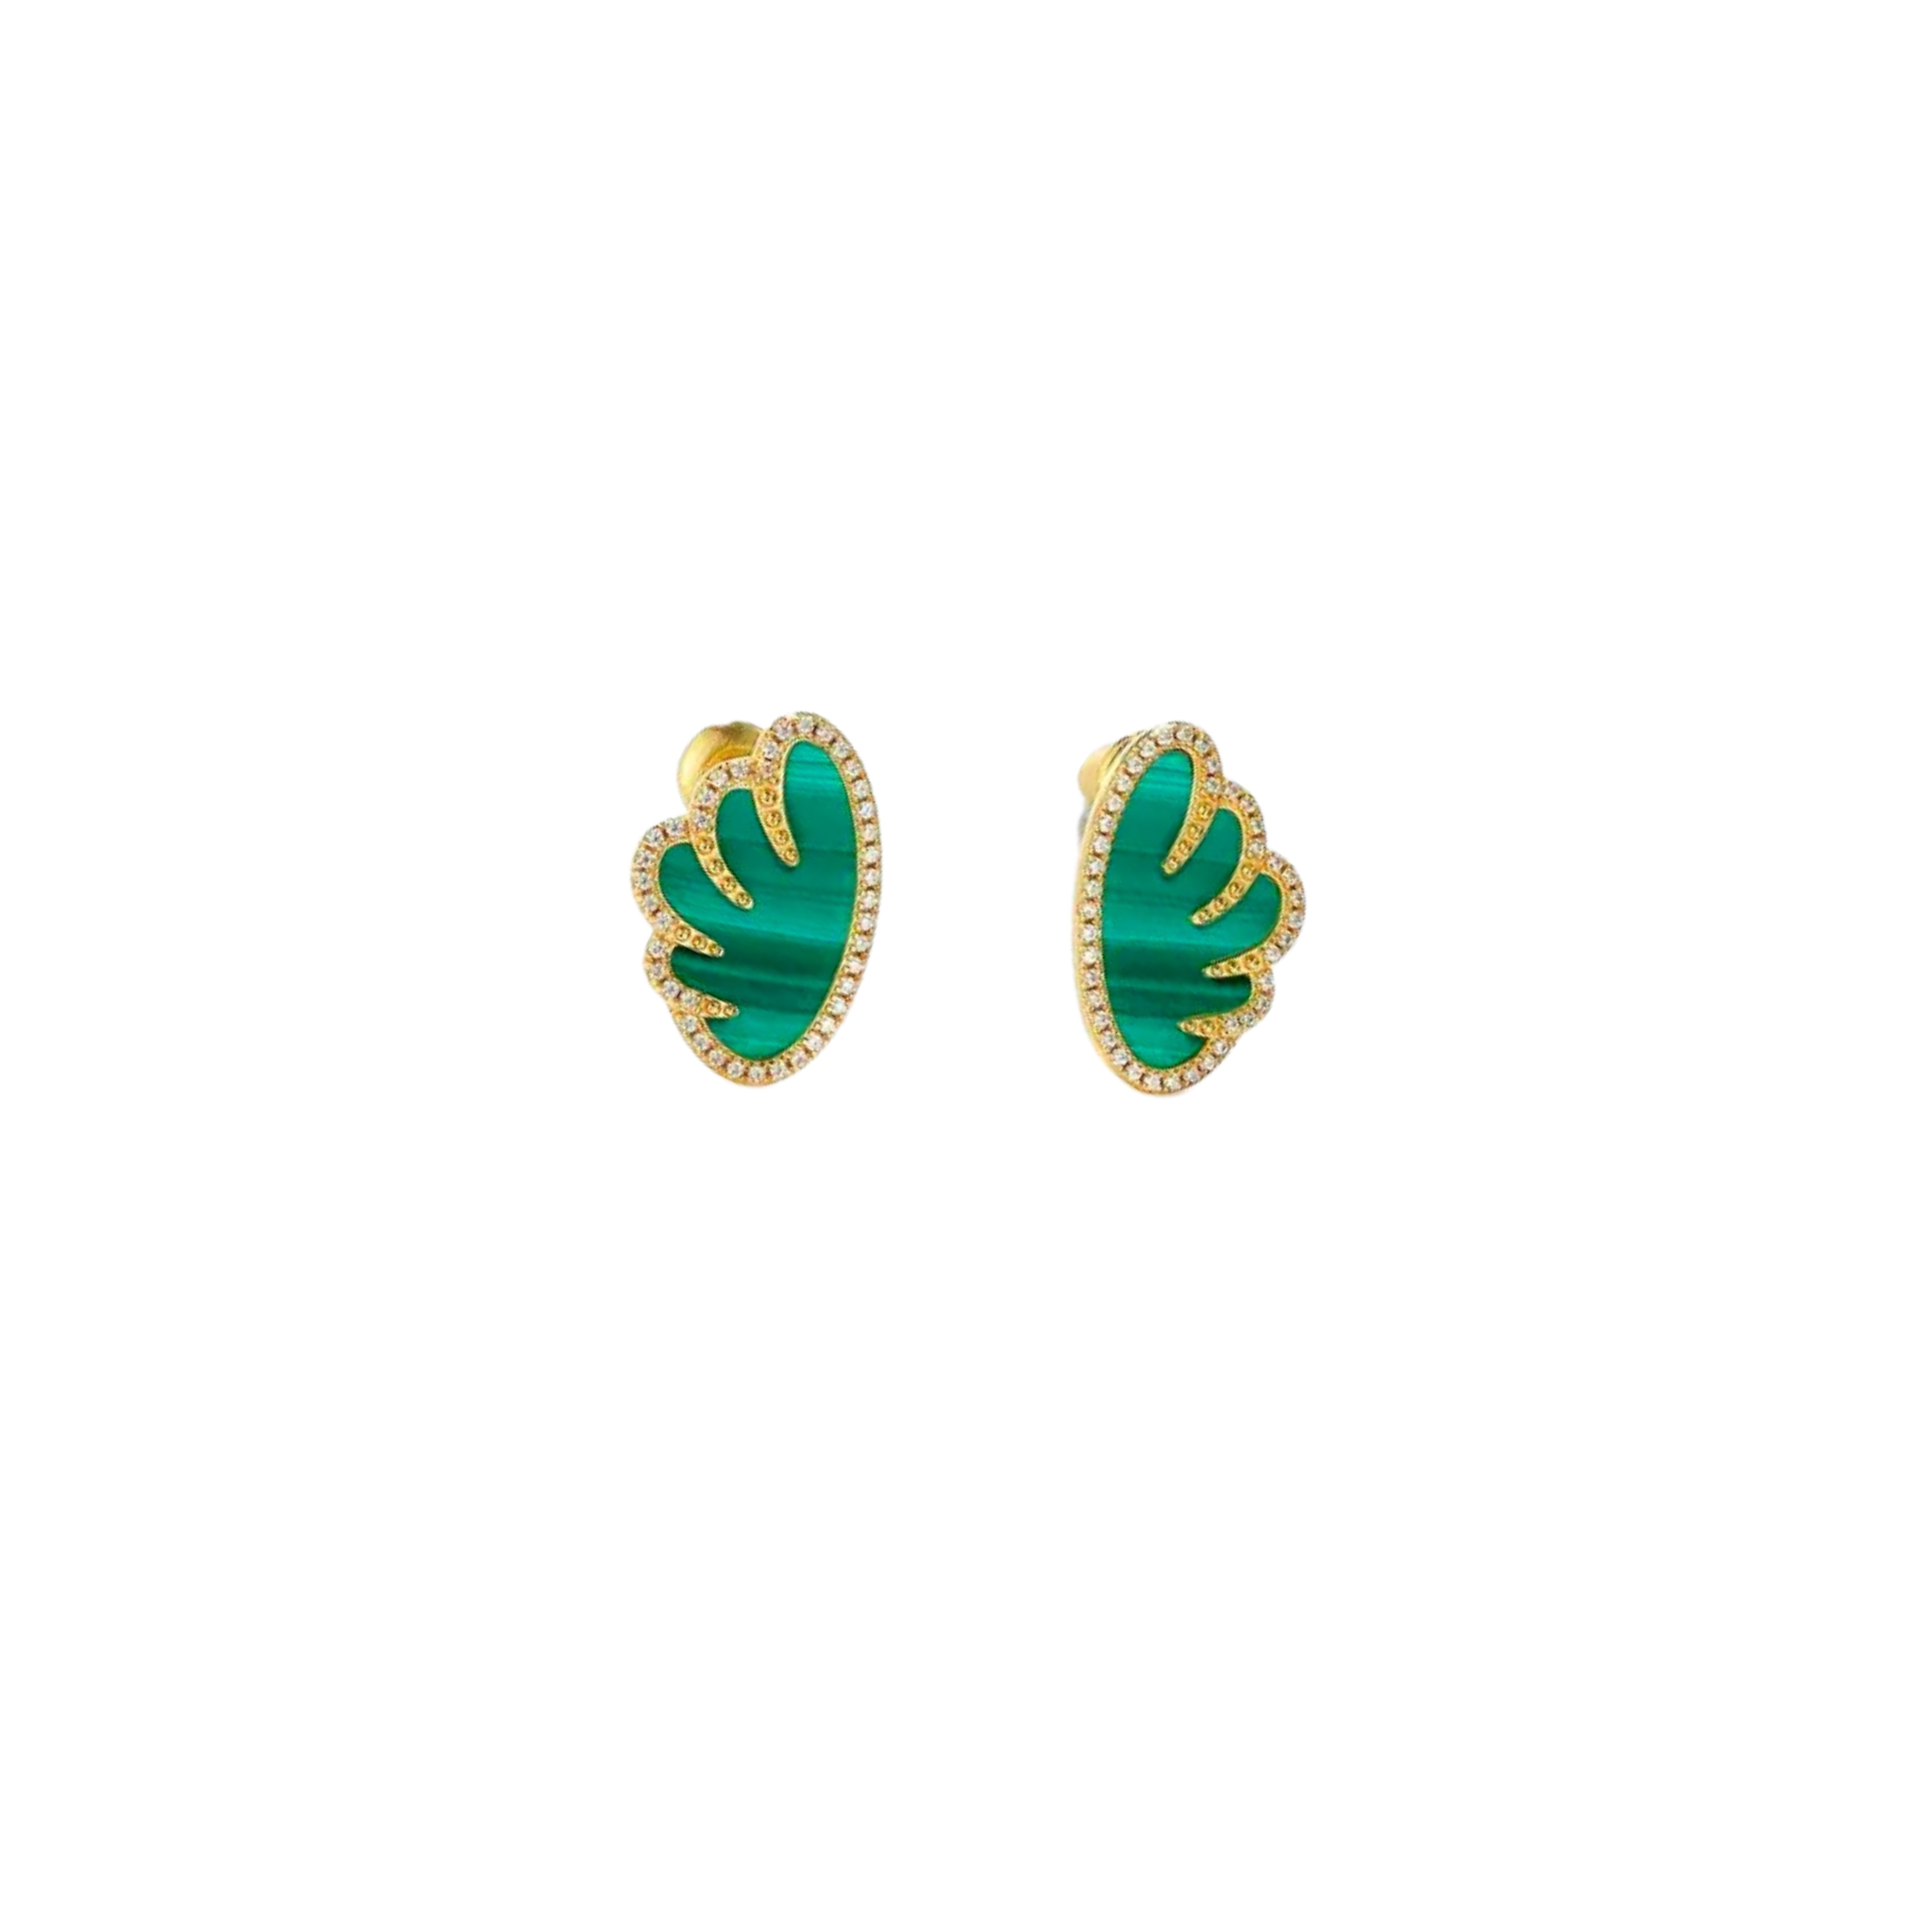 Malachite Stud and Pearl Drop Earrings - L'Amour Pearls